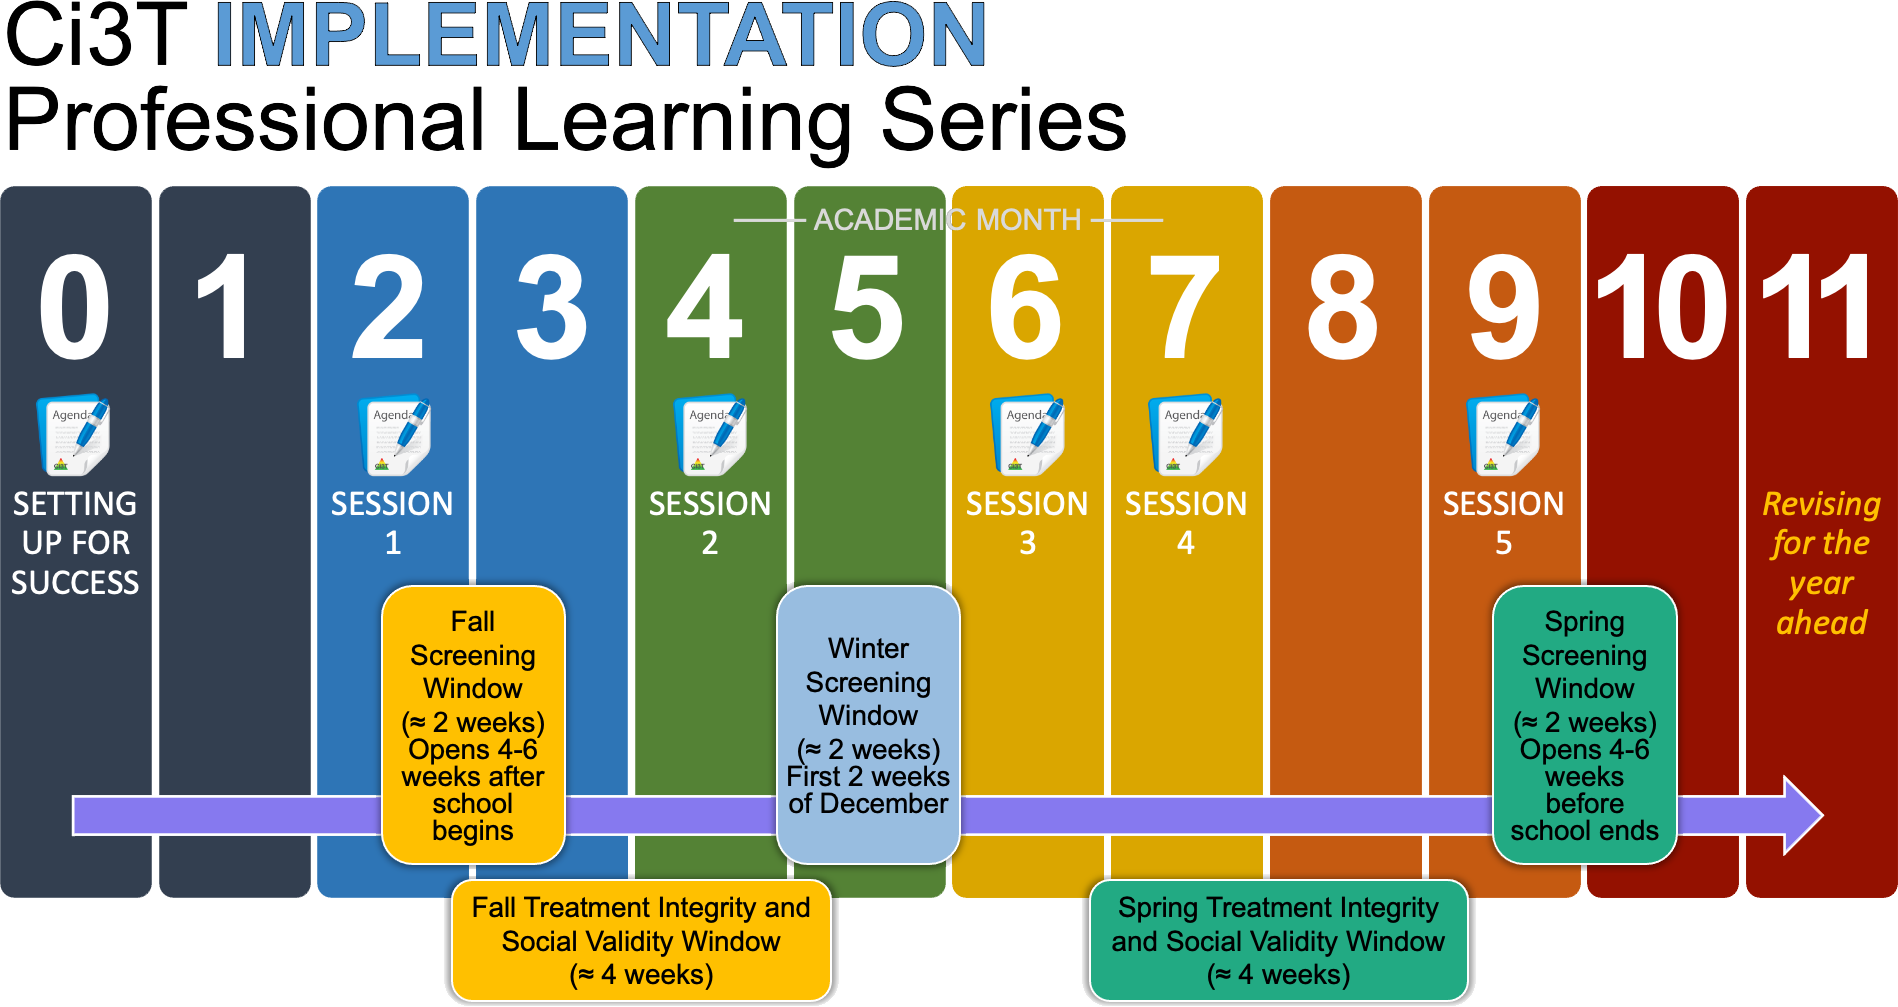 Ci3T implementation professional learning series timeline graphic